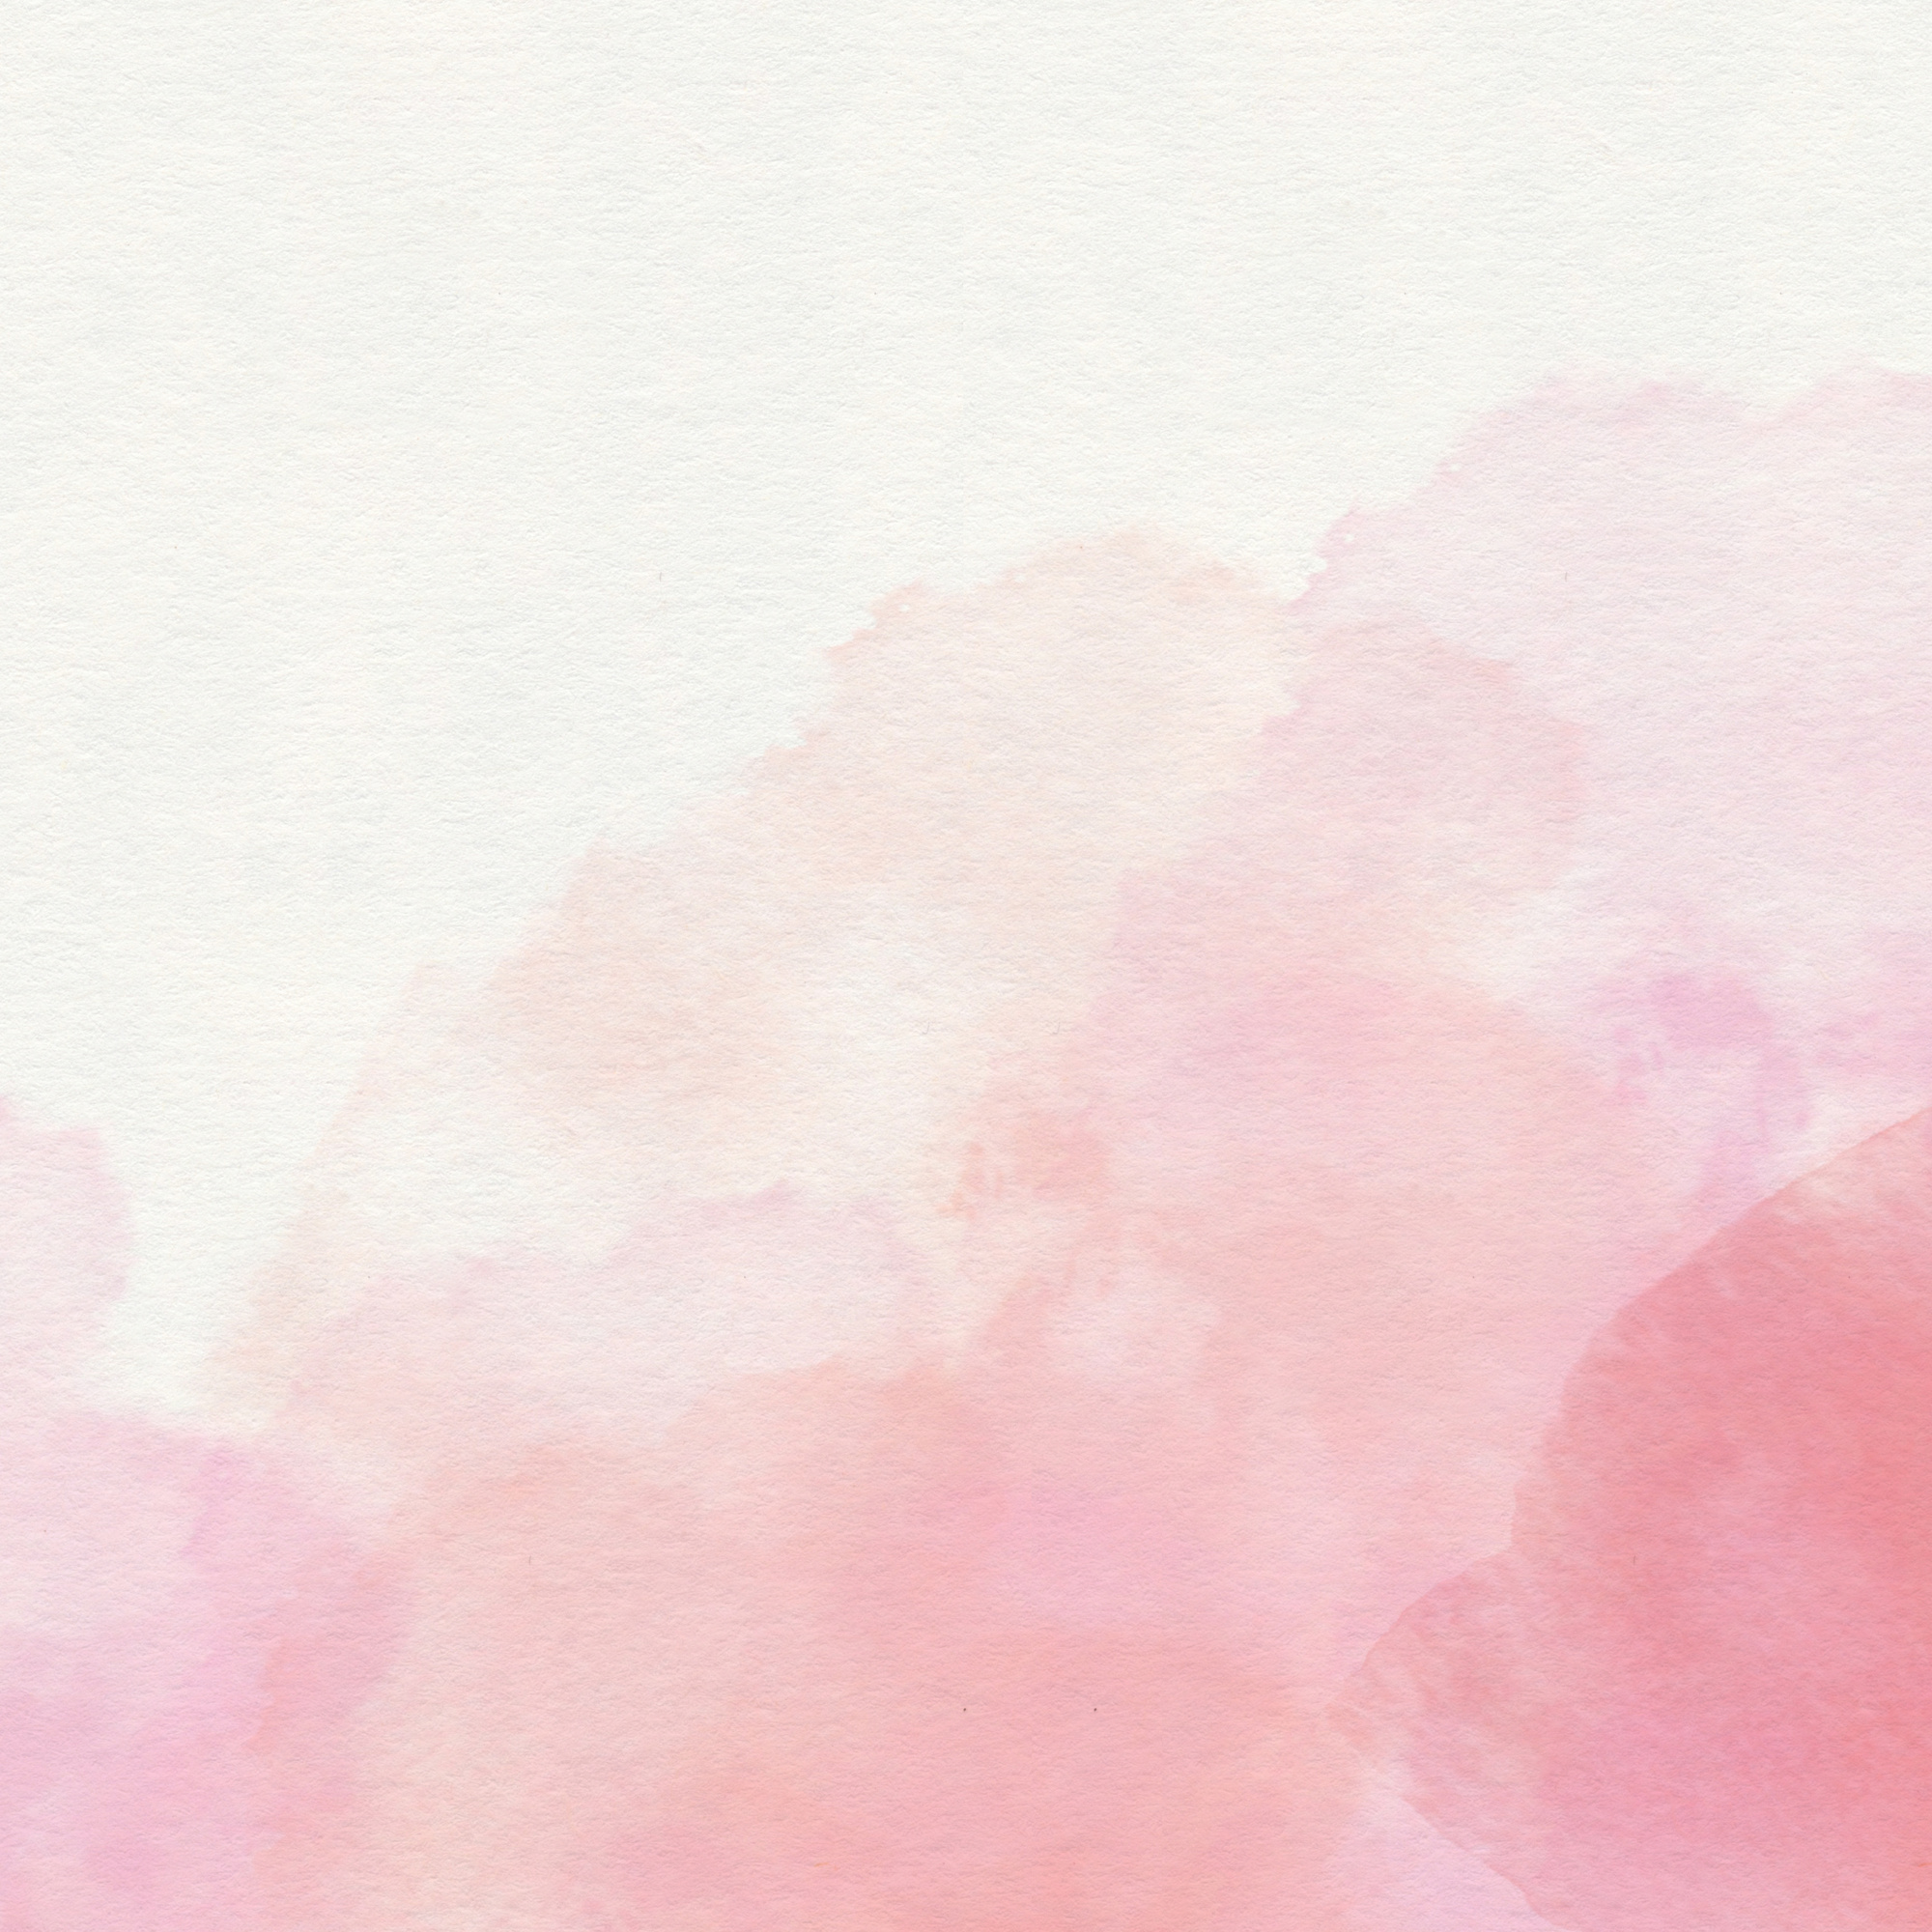 Pink Watercolor Stain Background